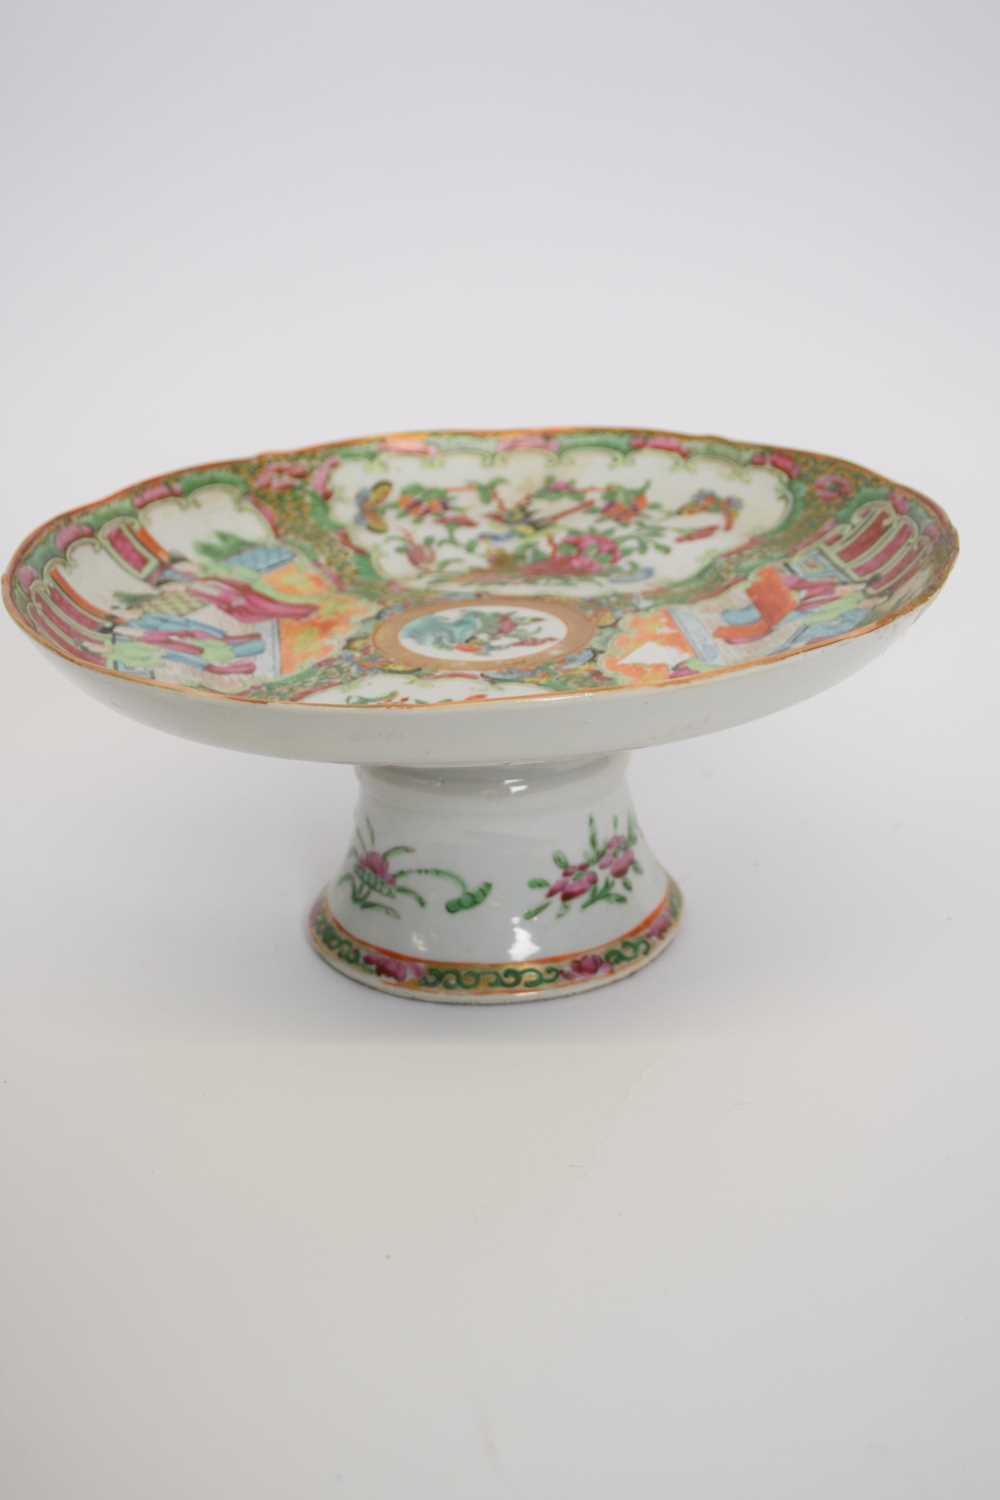 Cantonese porcelain tazza with typical designs of panels, figures, alternating with panels of